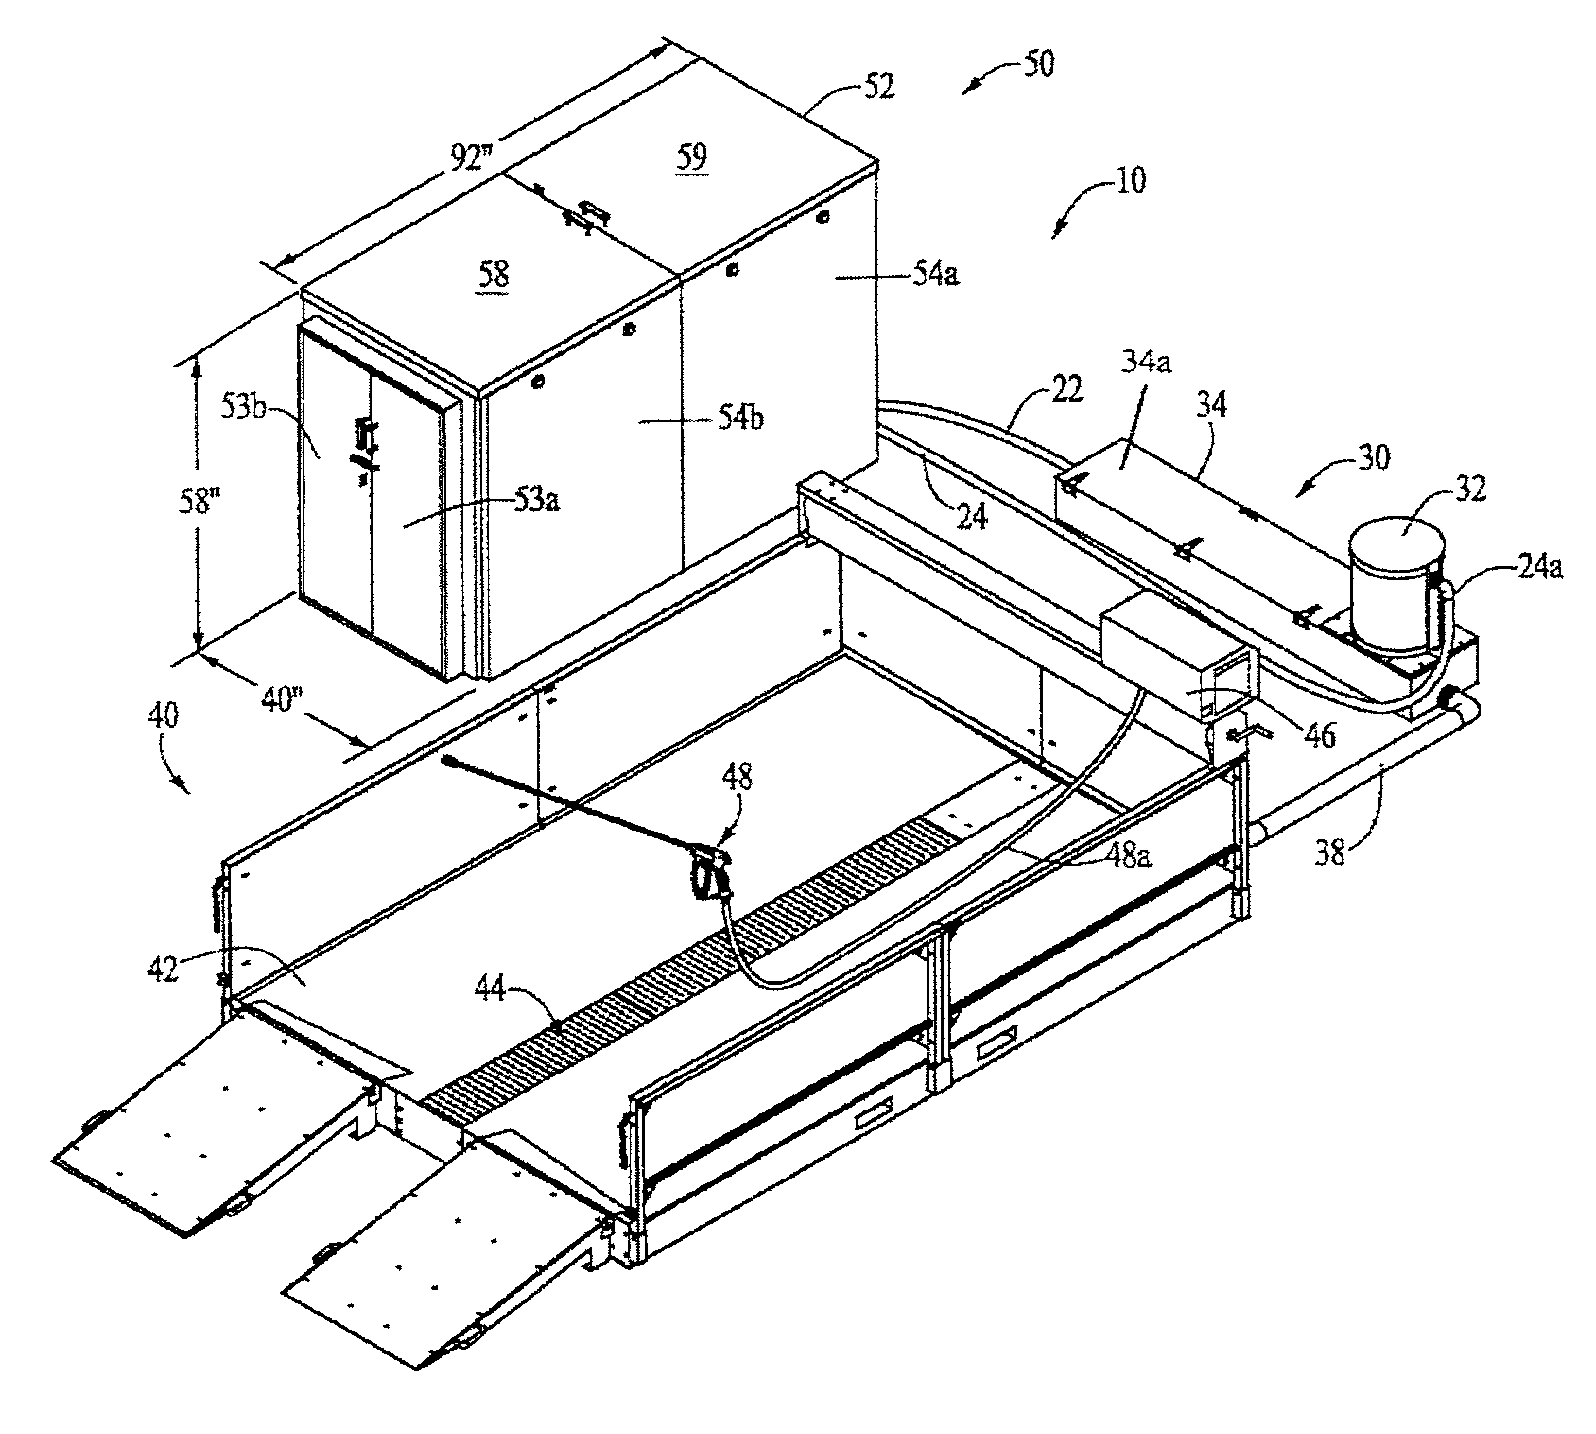 Immediate cleaning and recirculation of cleaning fluid and method of using same